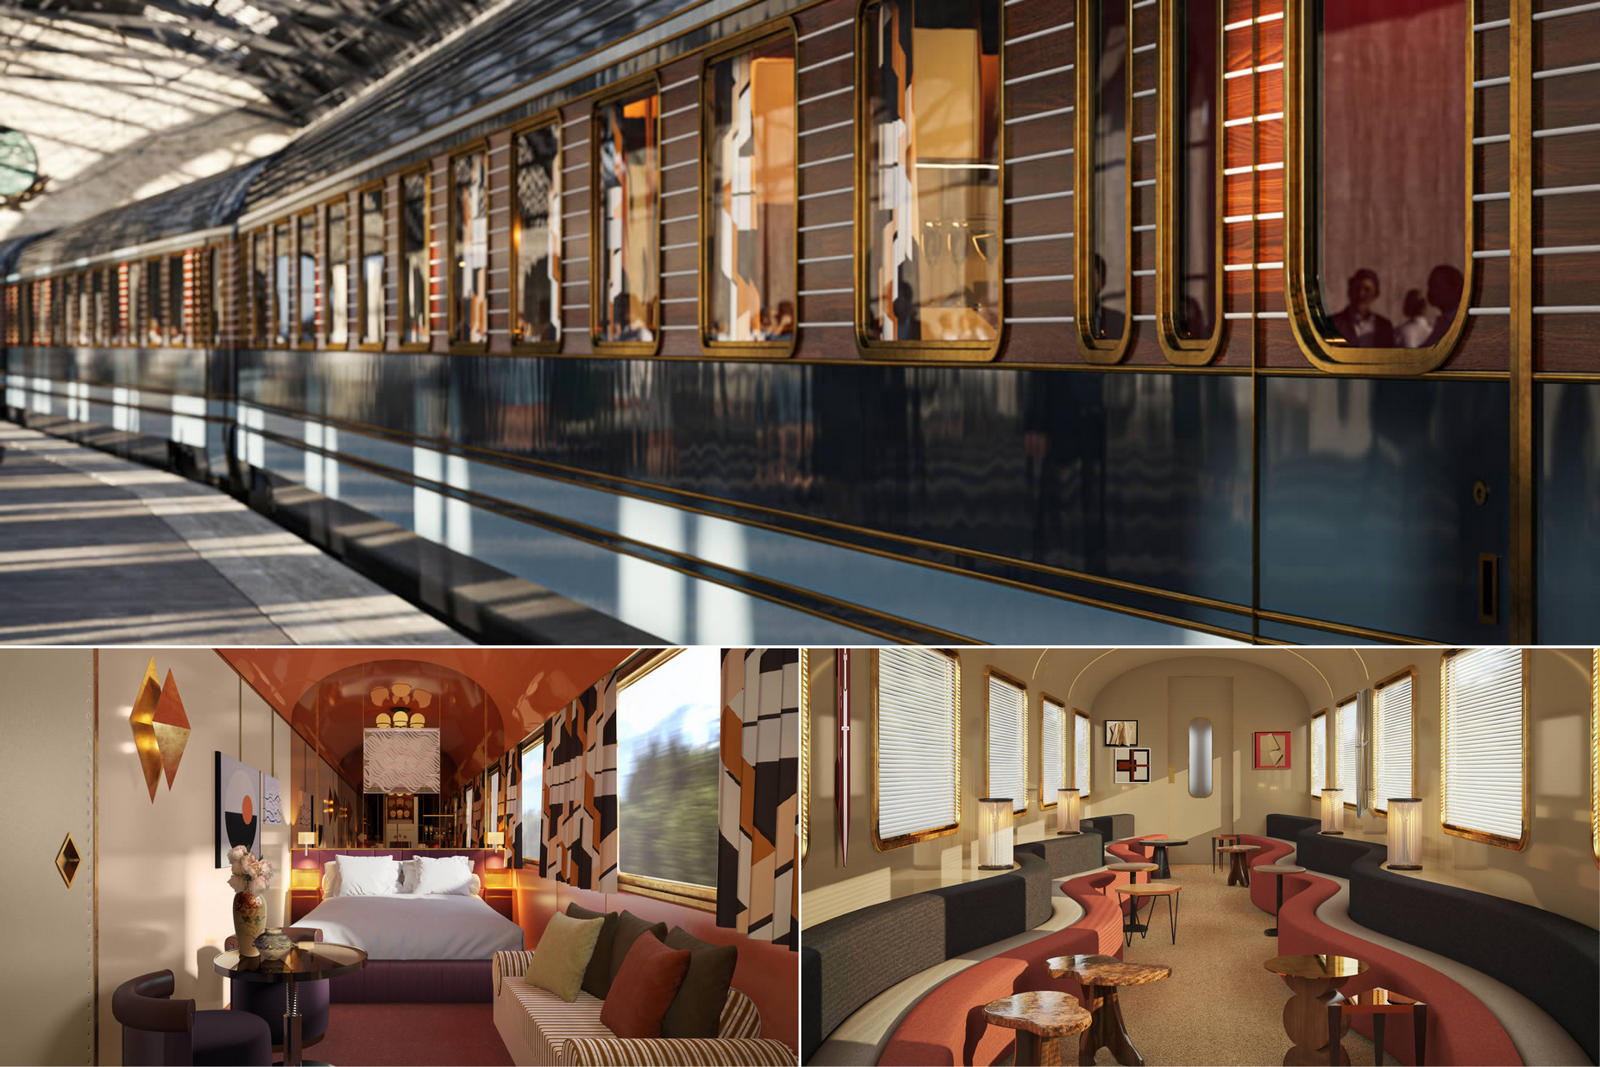 Get ready to experience Italy in a new light as Orient Express returns